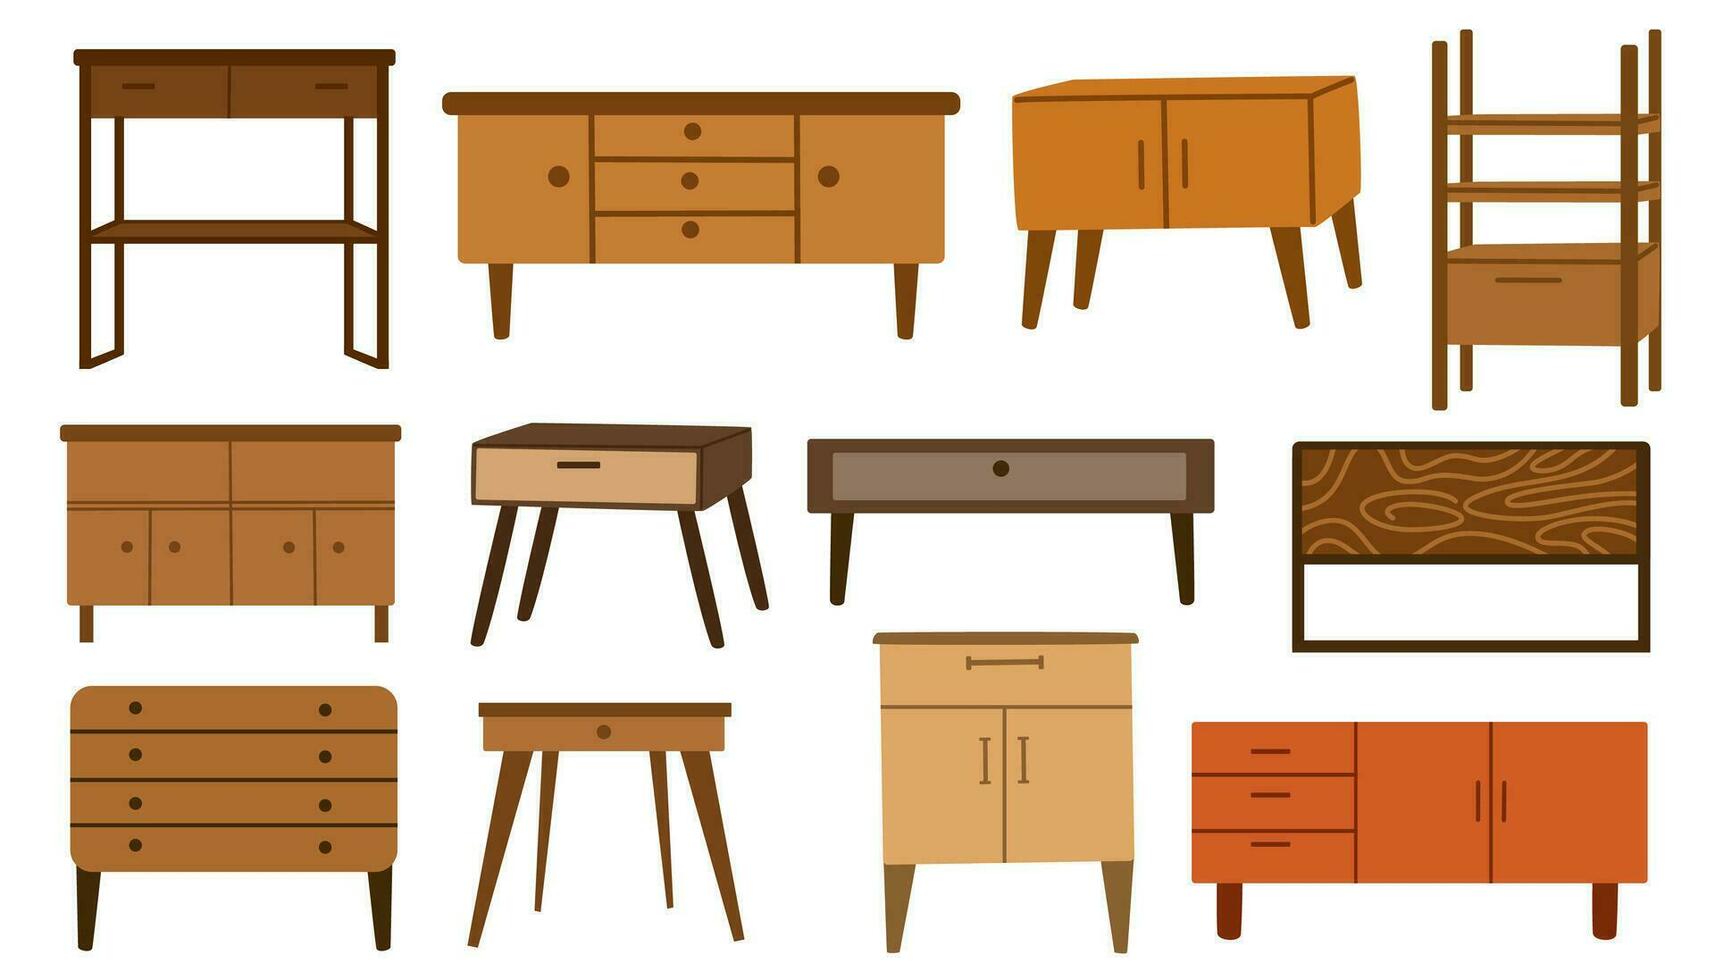 Chest of drawers, bedside table set. Furniture for home, living room and bedroom. Interior Dressers and cabinets. Vector illustration